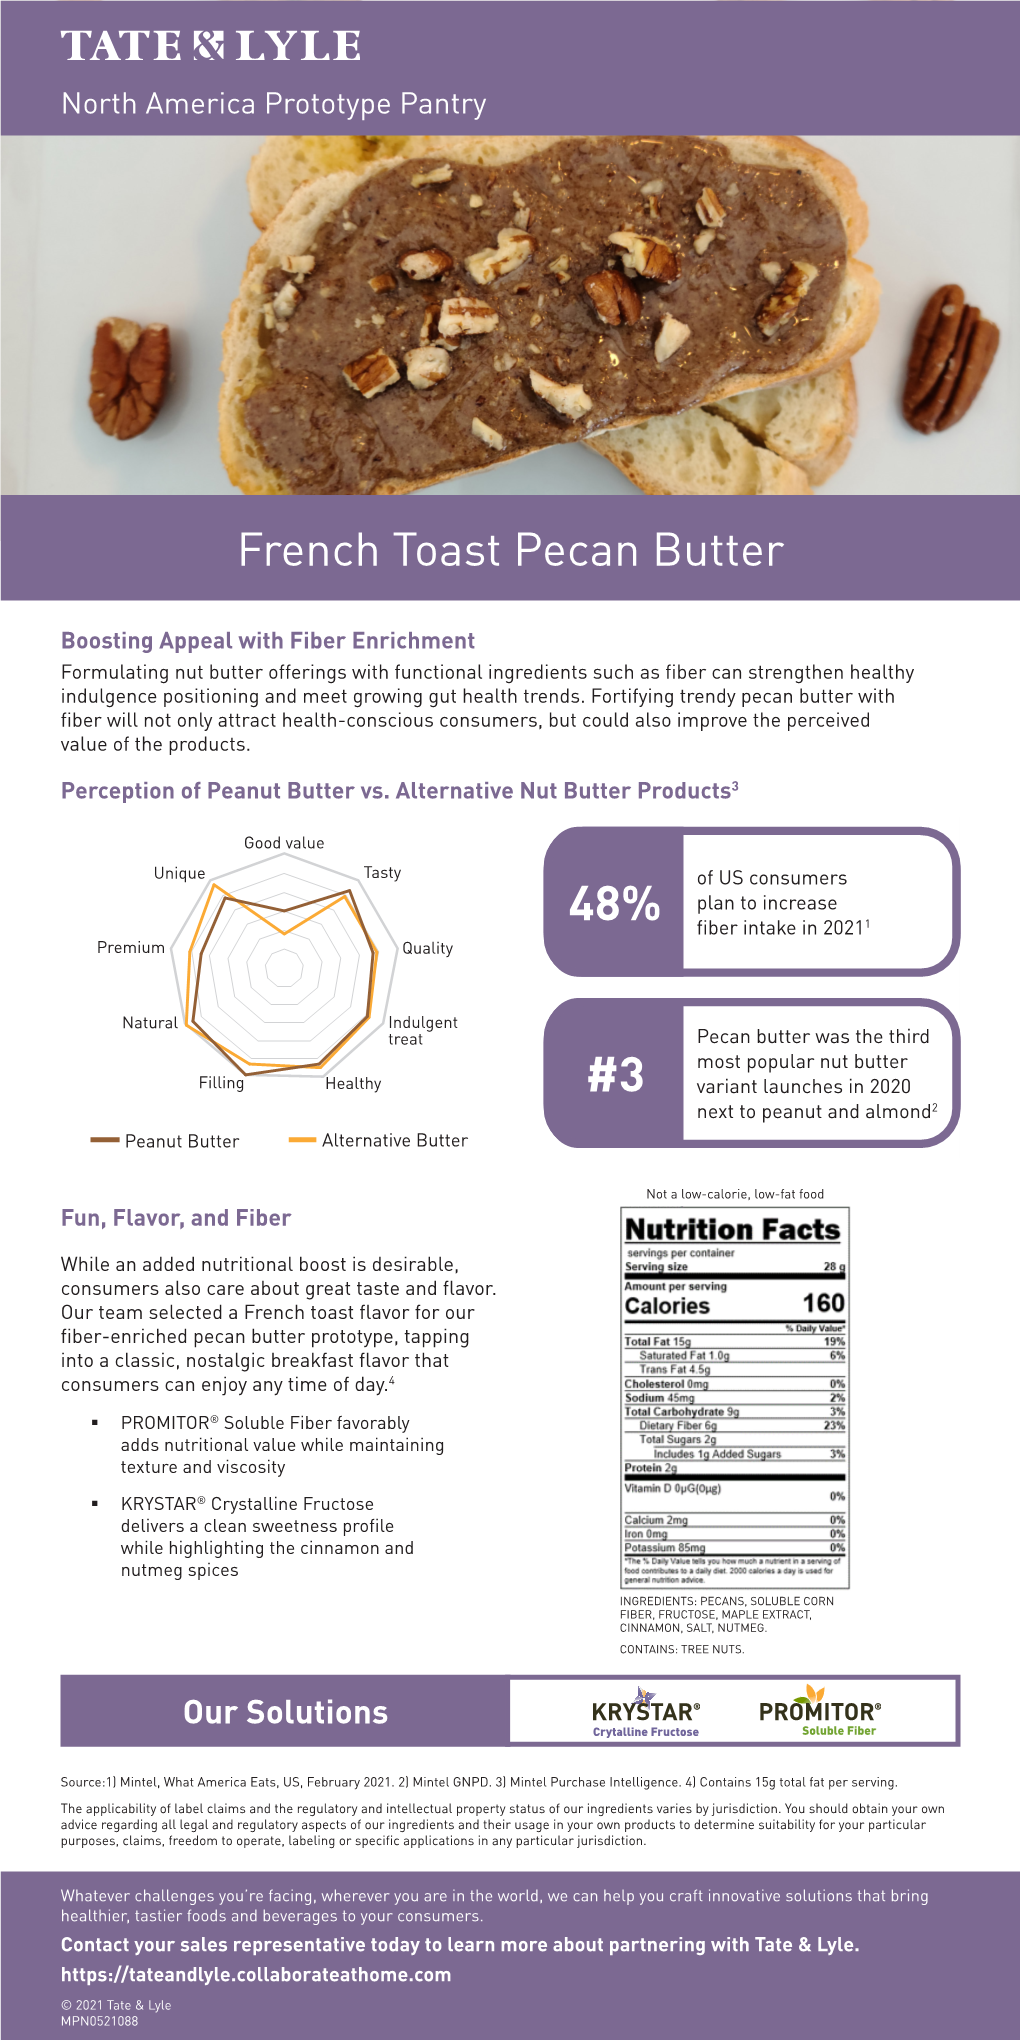 French Toast Pecan Butter